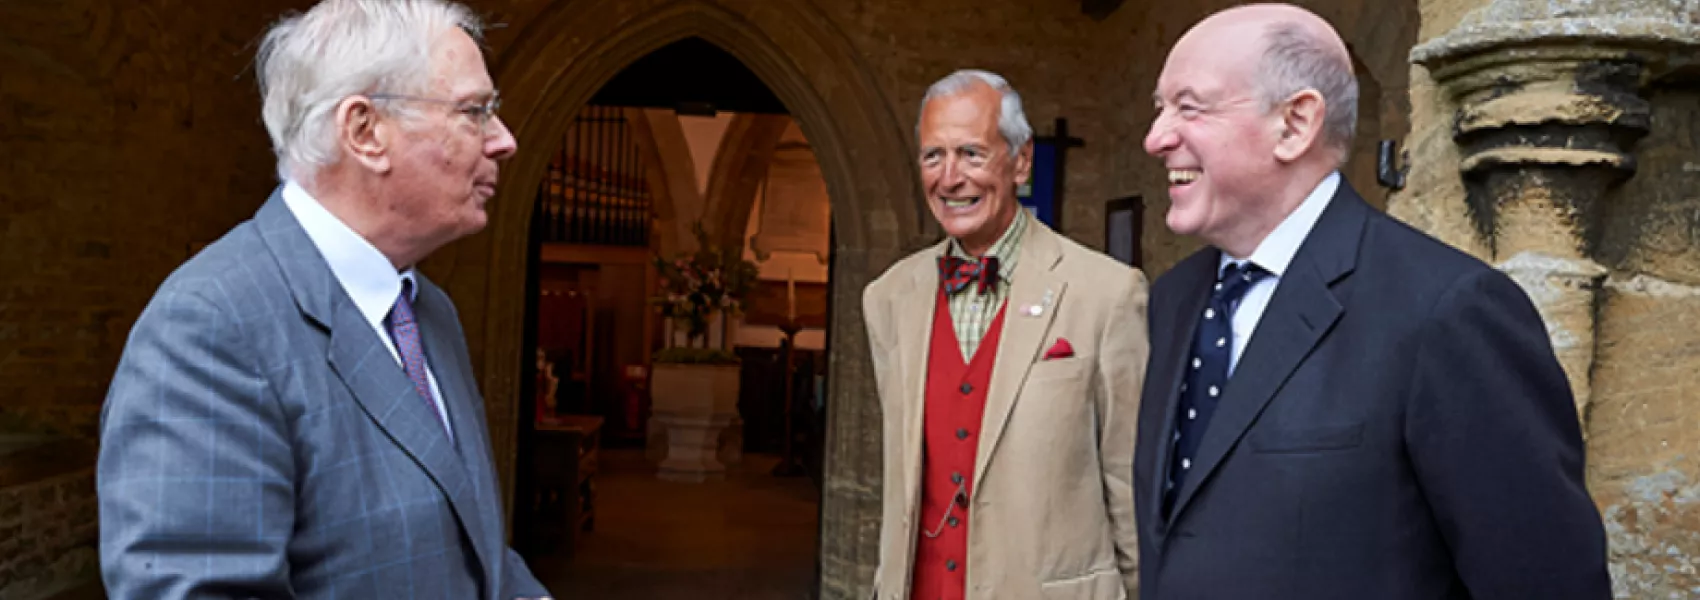 HRH Duke of Gloucester at Wootton Parish Church, greeted by the Warden, and Church Warden, Nicholas Tomlinson